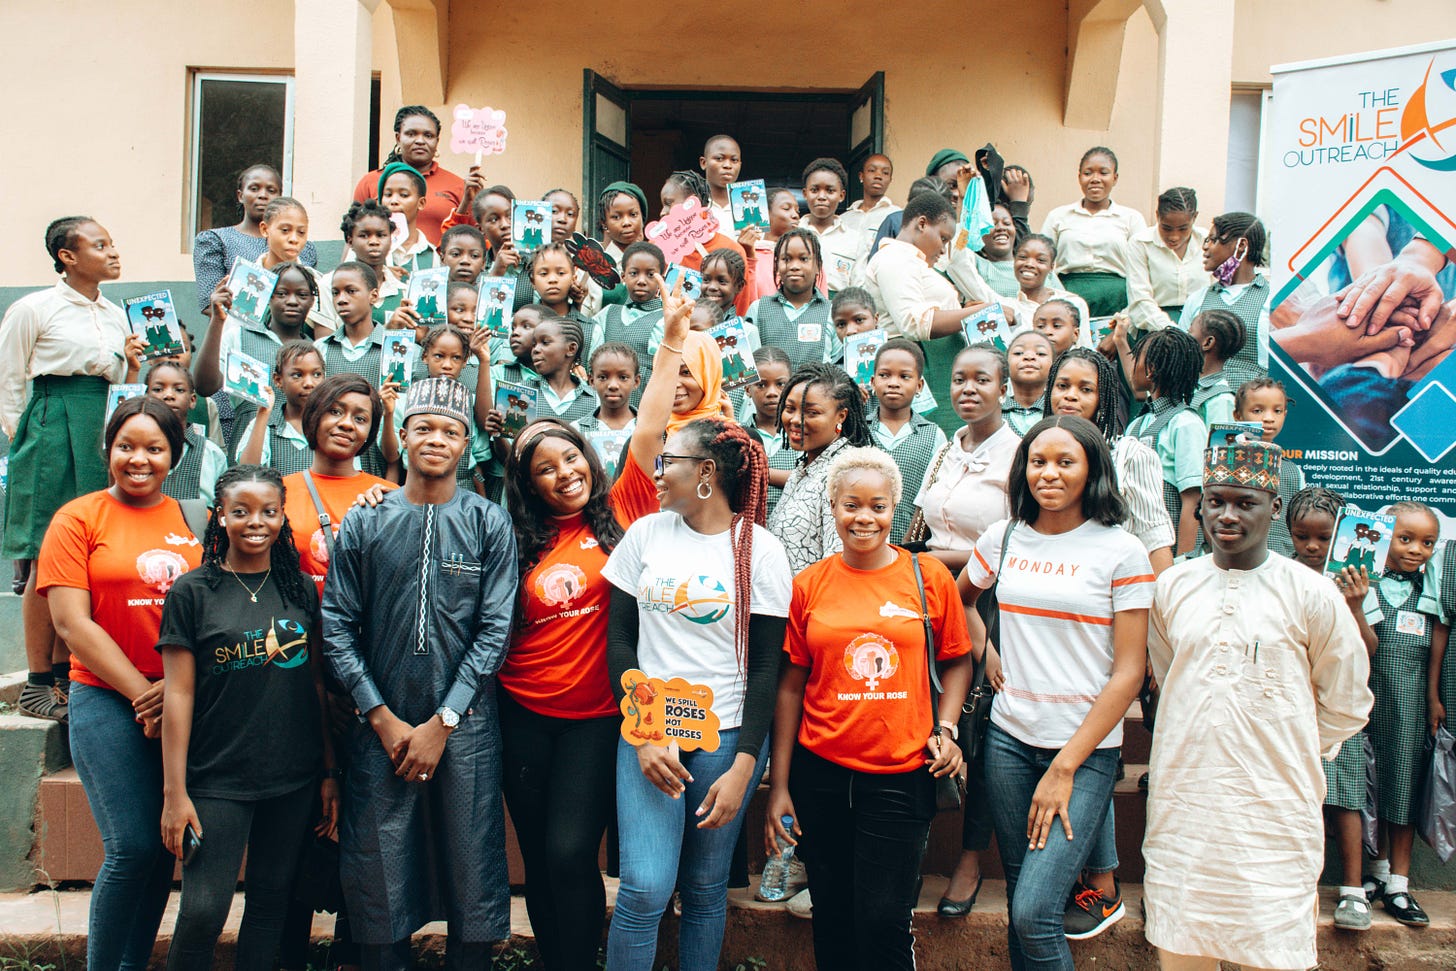 Photos of the "Outreach Challenge" by The SmileOutreach and Chioma illeka Foundation